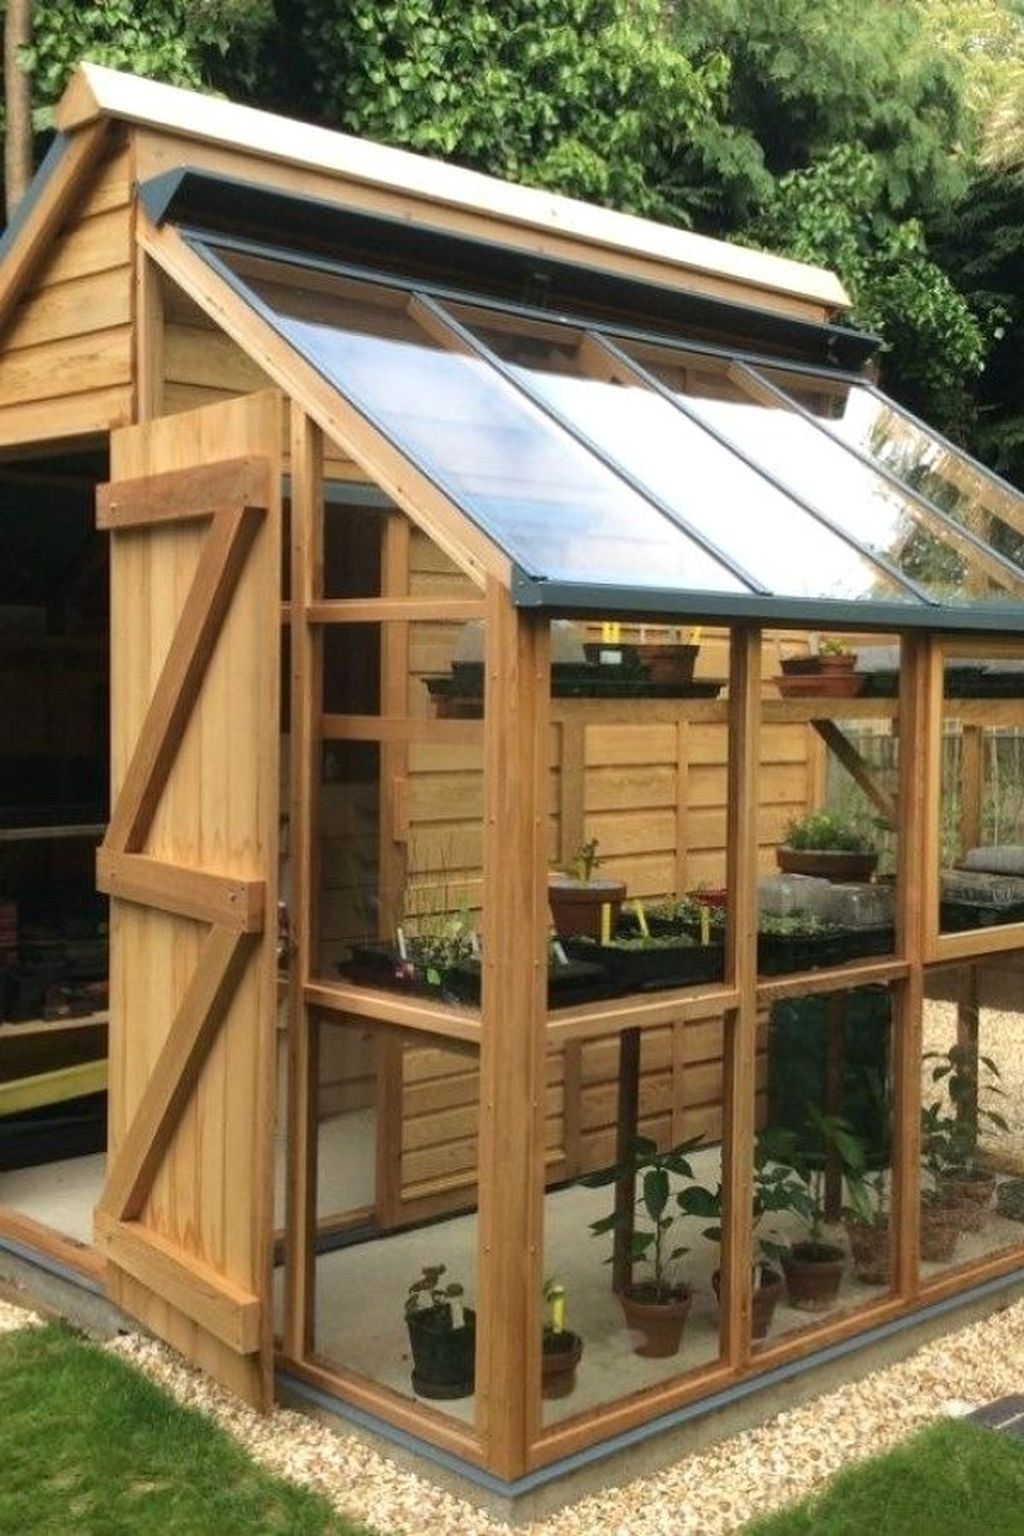 The Ultimate Guide to Plastic Sheds: Pros
and Cons